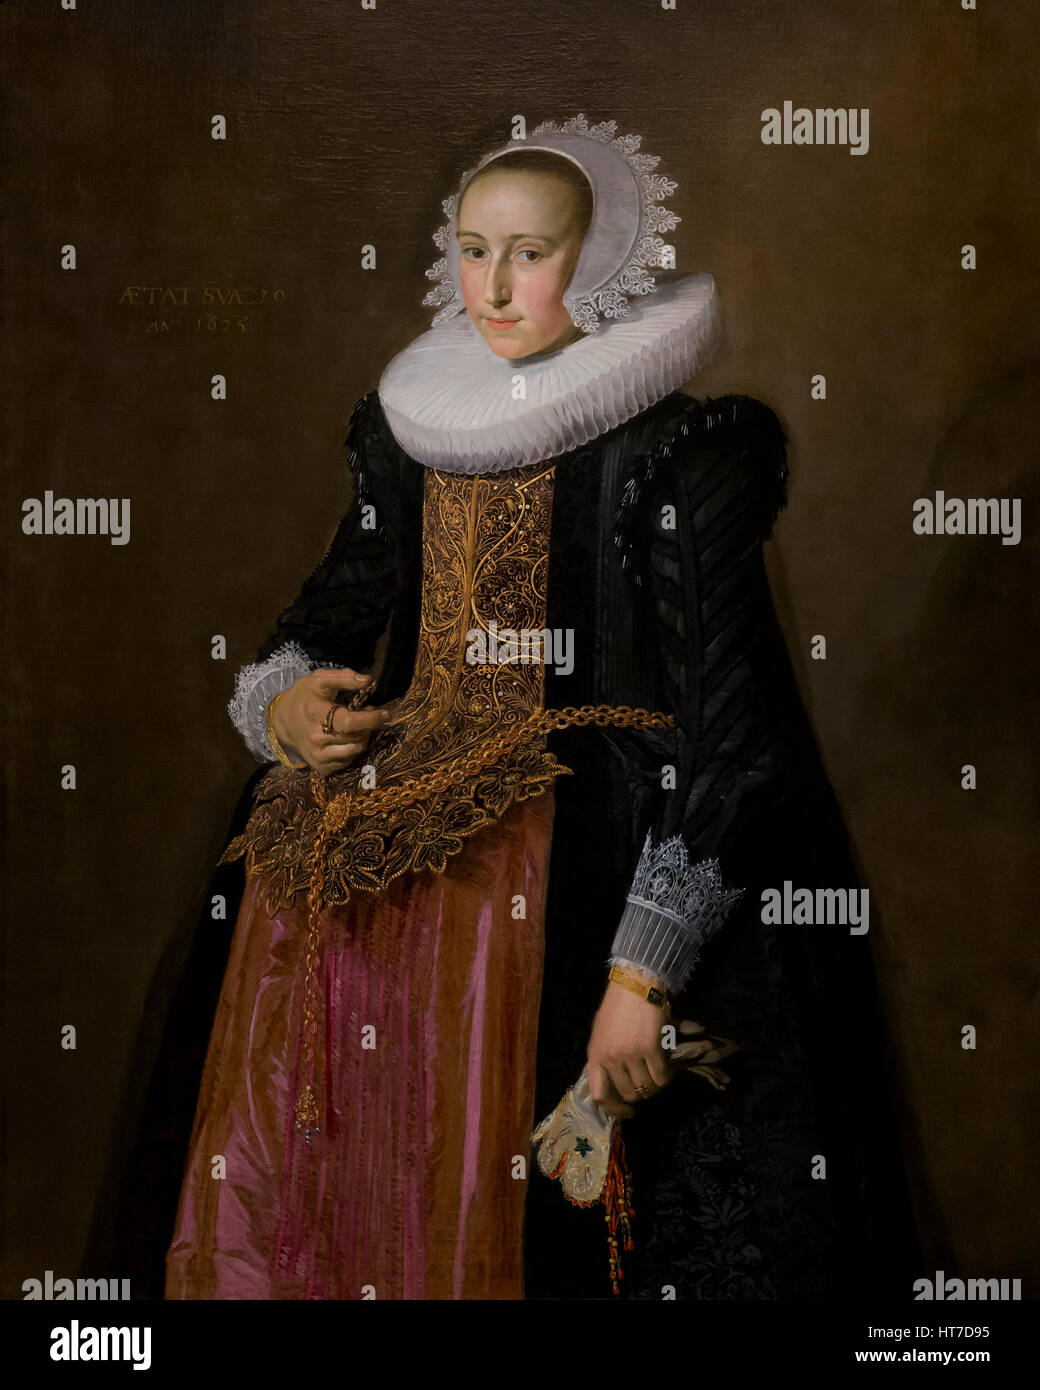 Portrait of Aletta Hanemans, by Frans Hals, 1625, Royal Art Gallery, Mauritshuis Museum, The Hague, Netherlands, Europe Stock Photo